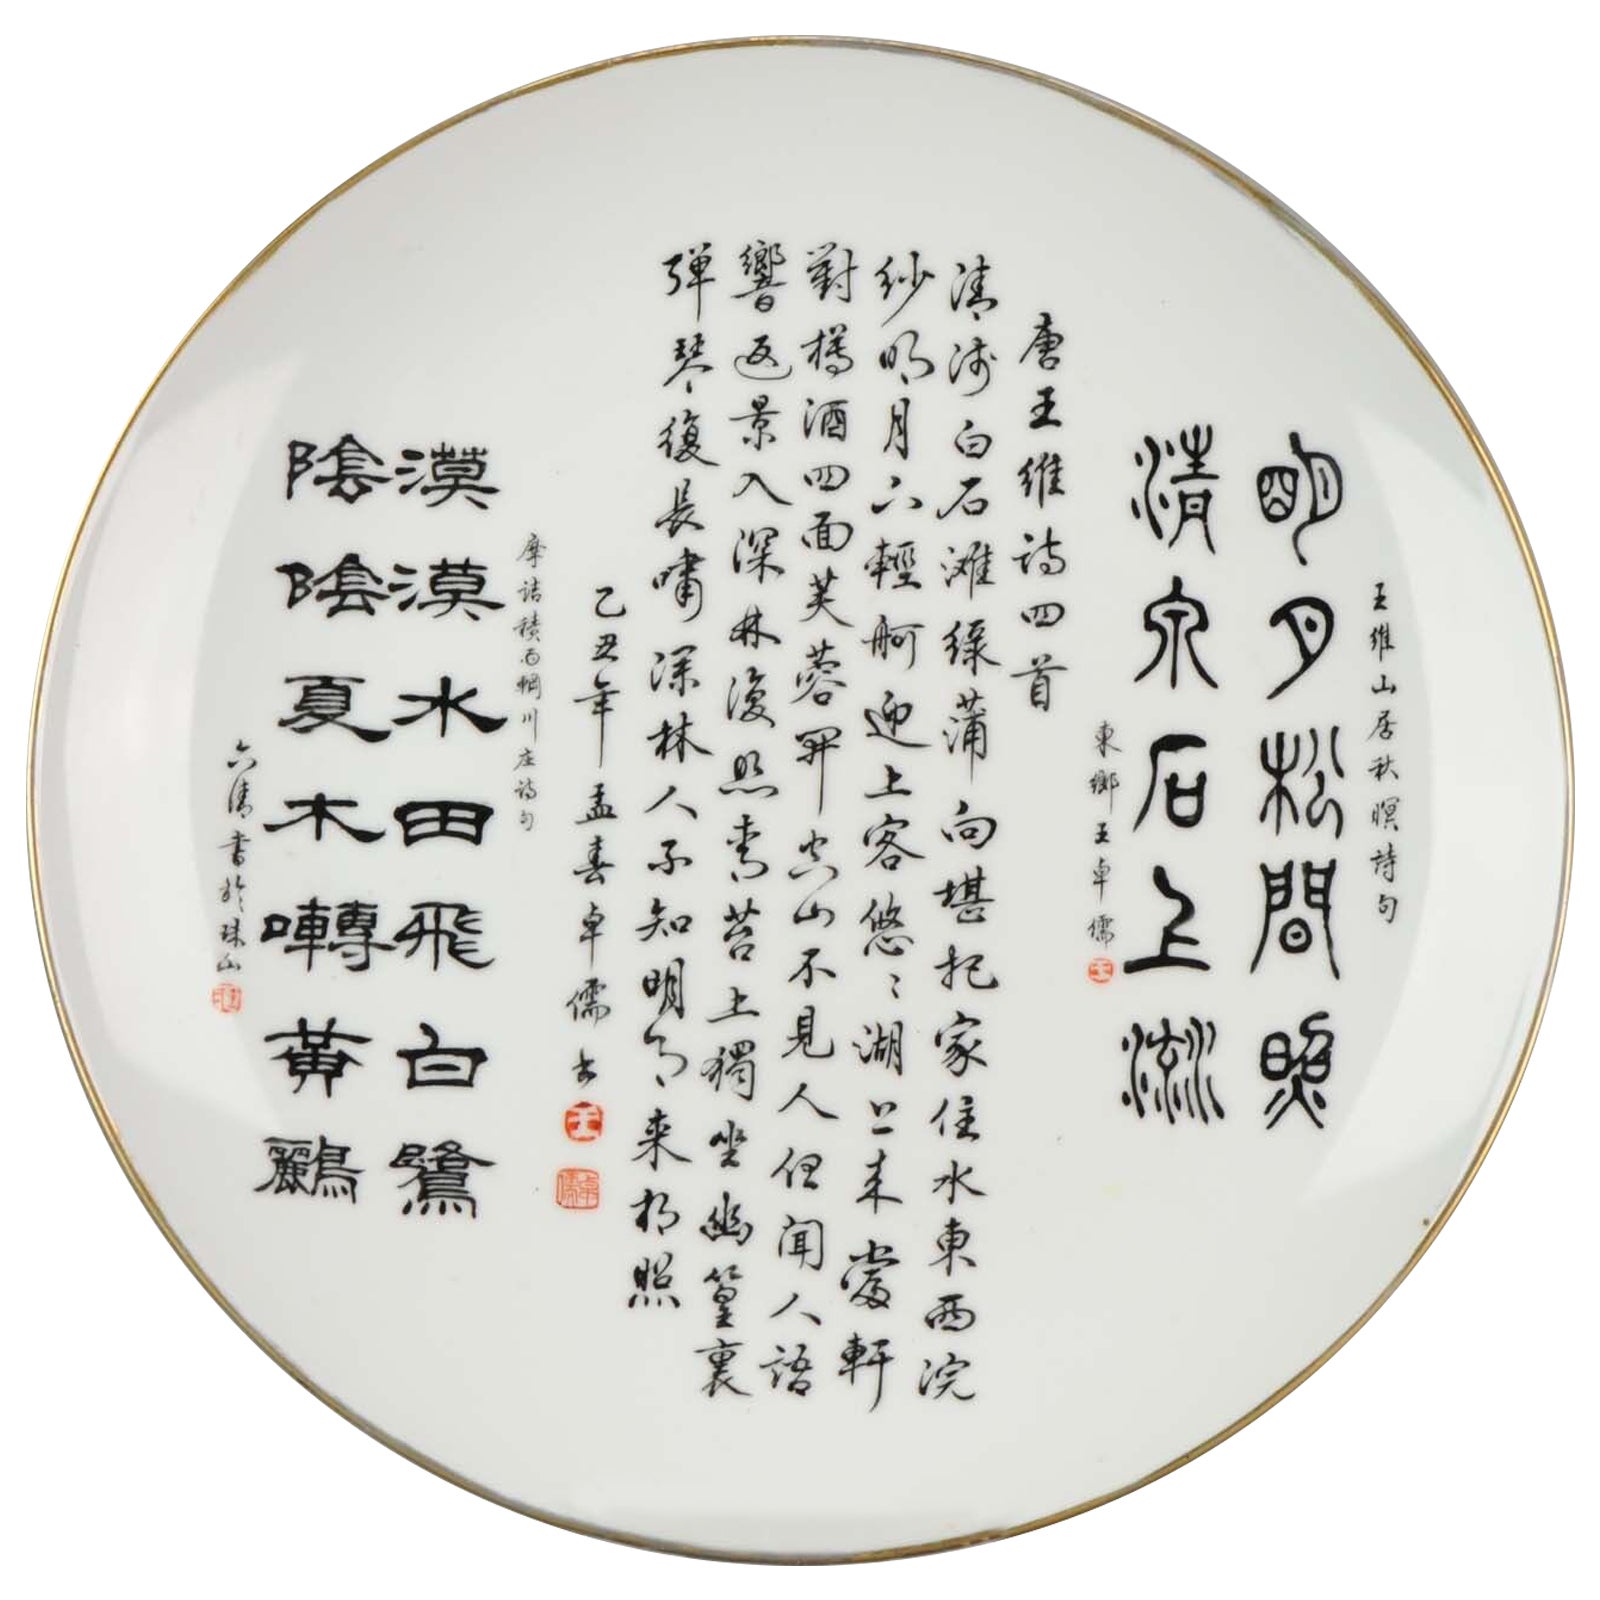 Perfect Calligraphy Plate Chinese Porcelain LiuQing and Wang Zhuo Ru, Dated 1985 For Sale